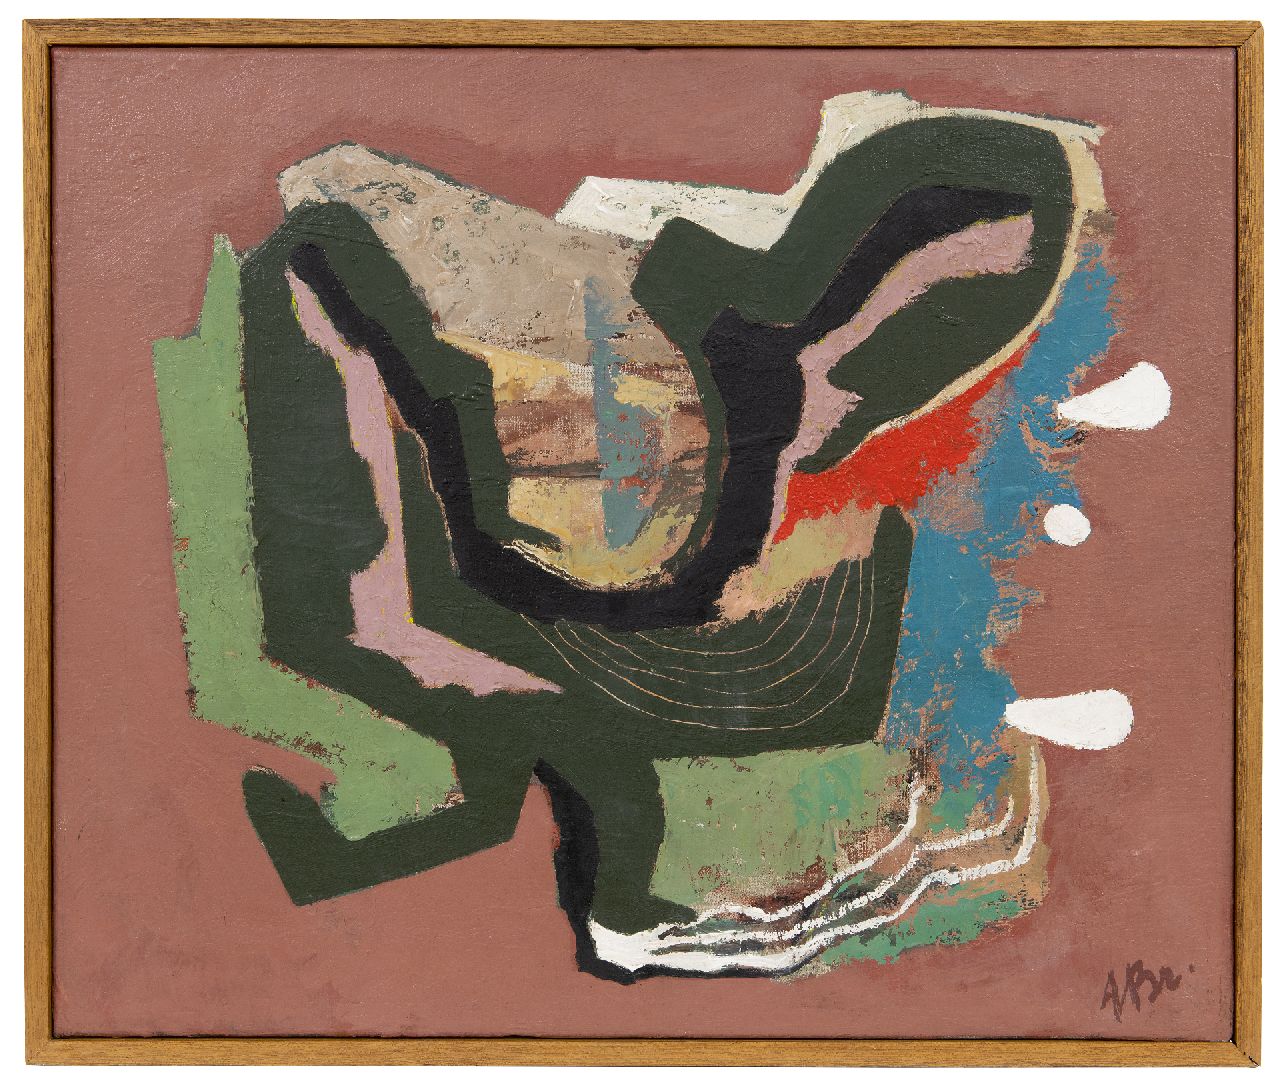 Breetvelt A.  | Adolf 'Dolf' Breetvelt | Paintings offered for sale | Abstract, oil on canvas 50.3 x 60.3 cm, signed l.r. and on the stretcher and to be dated end 1940's